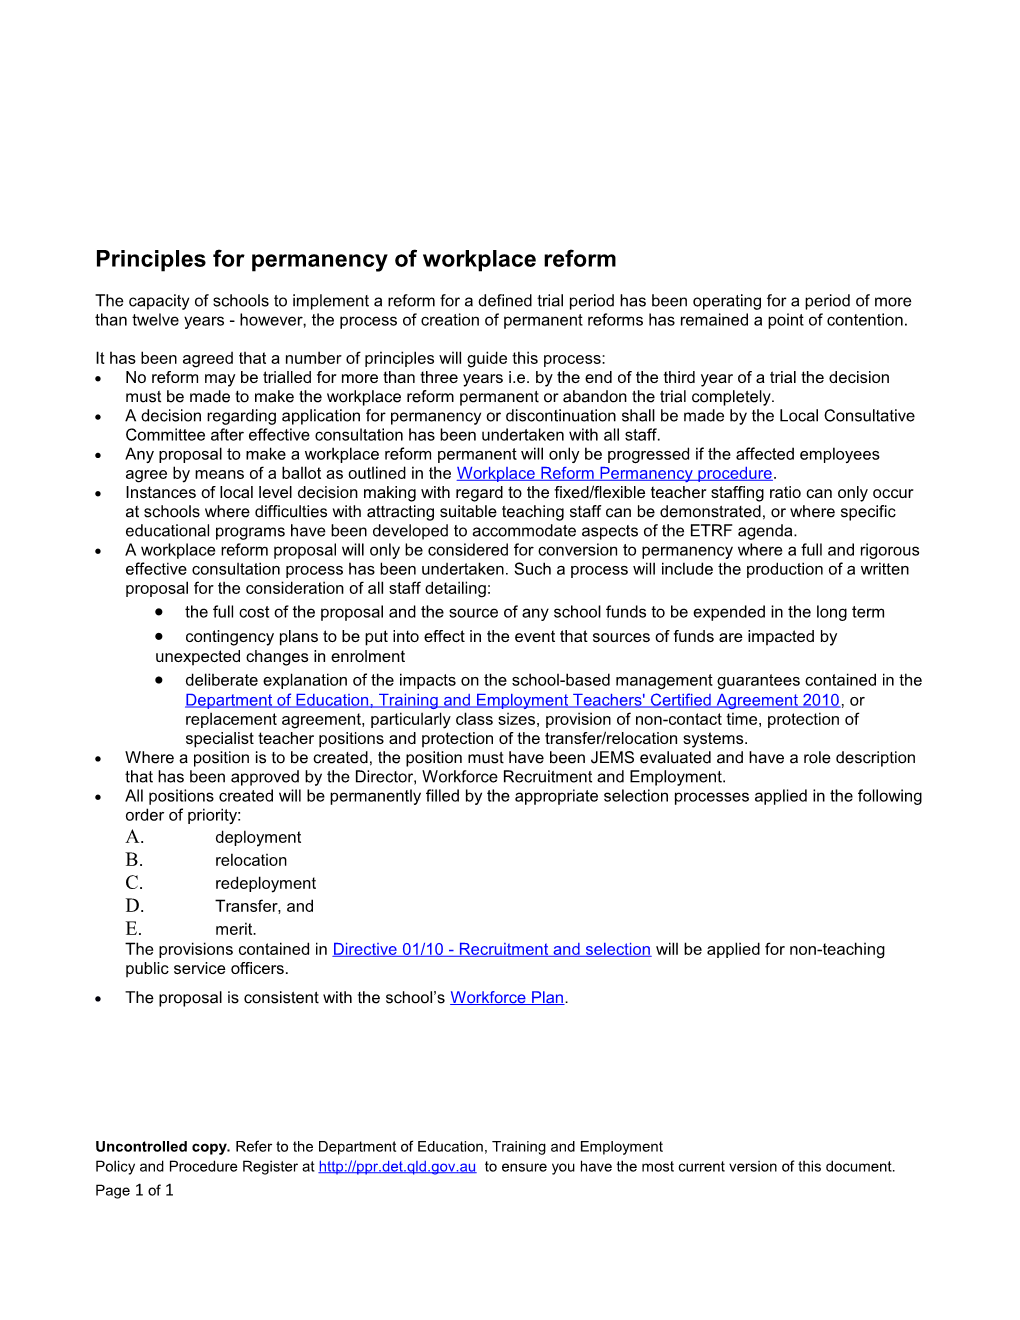 Principles for Permanency of Workplace Reform